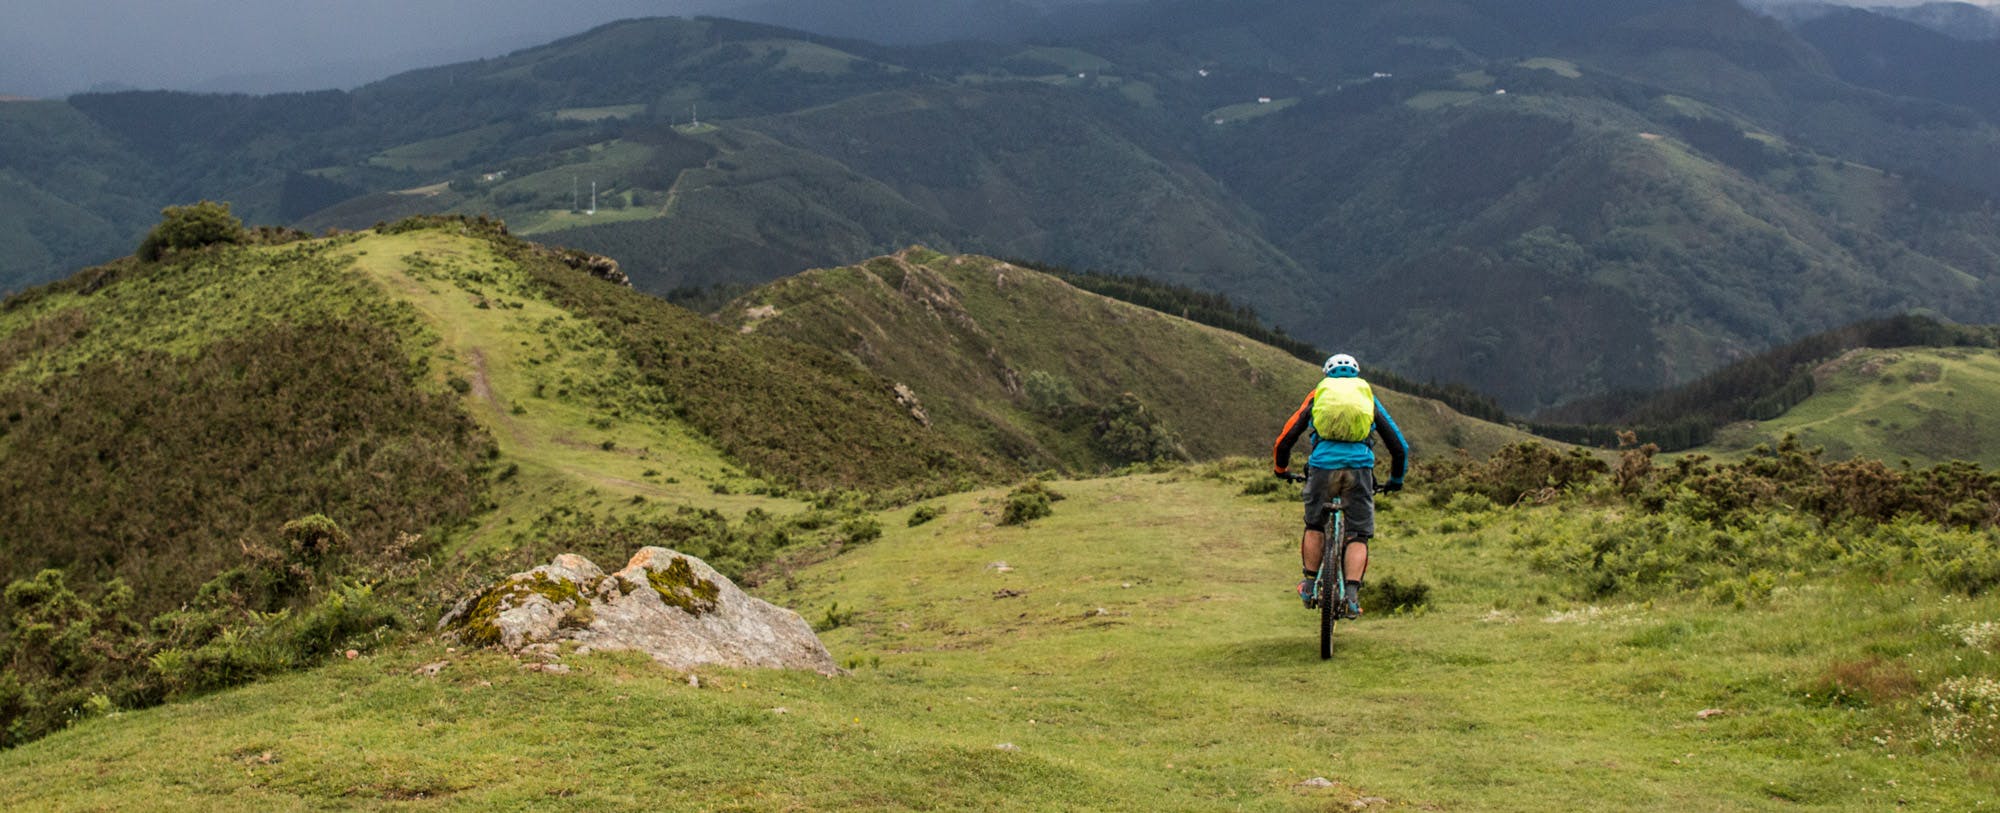 9 Reasons to Ride with Basque MTB Guides